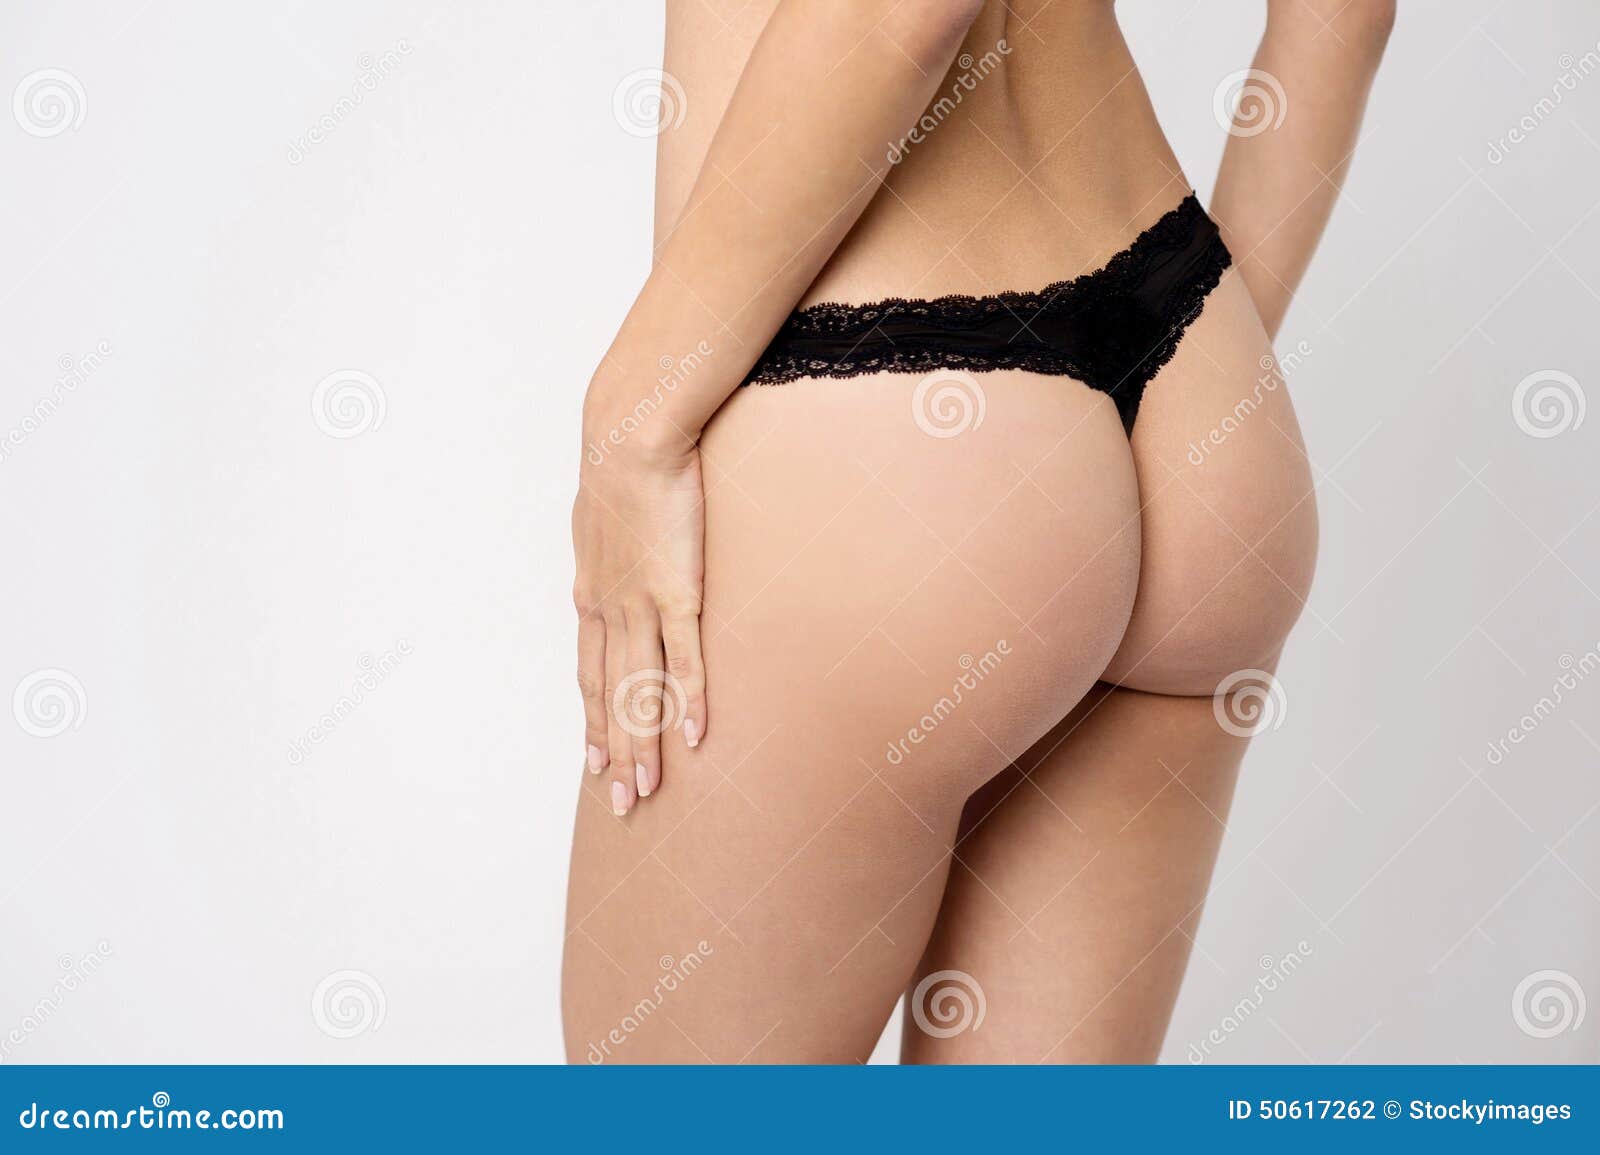 Sexy Woman Ass Wearing A Thong Stock Photo, Picture and Royalty Free Image.  Image 25817596.